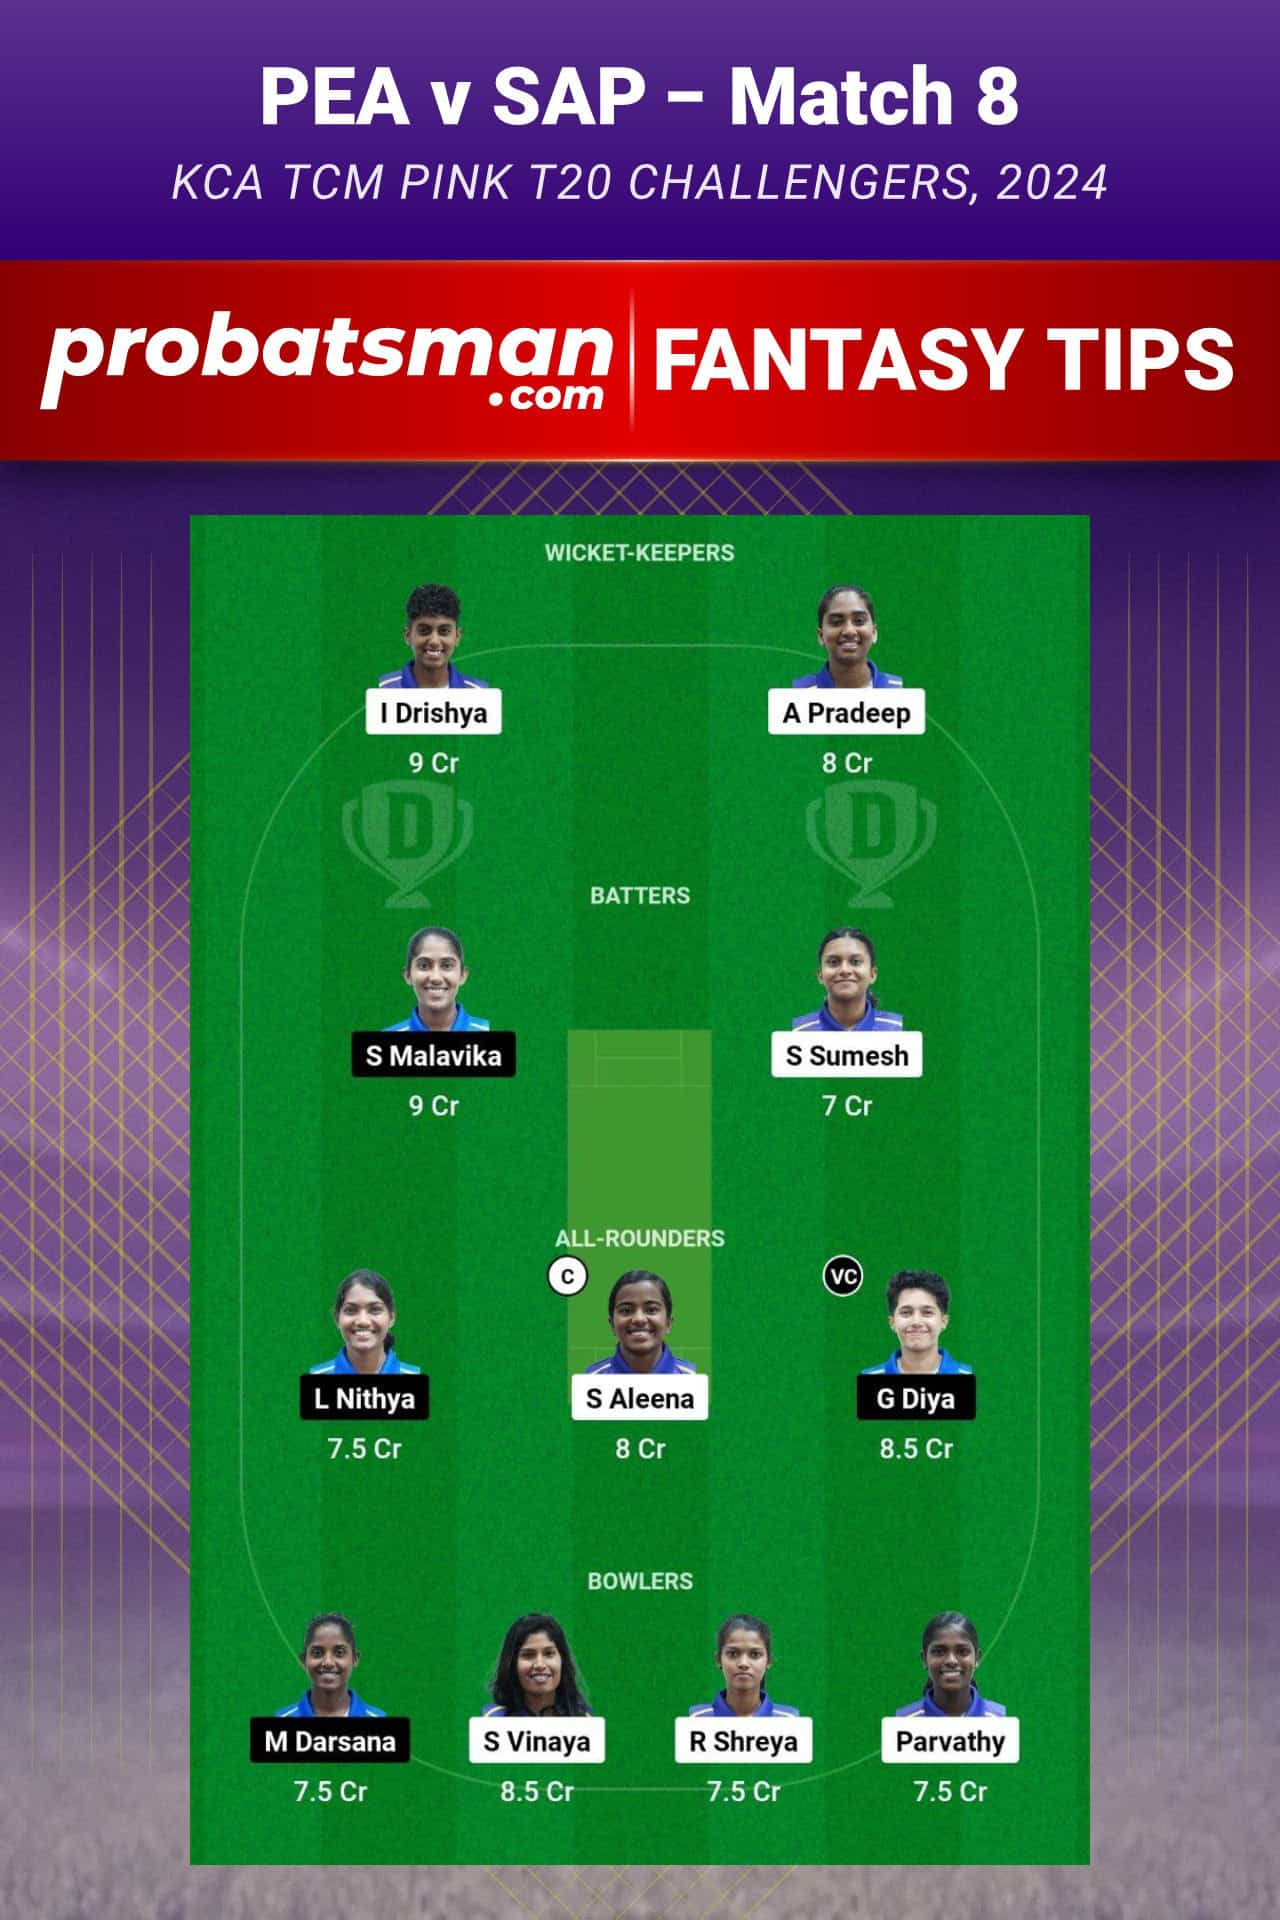 PEA vs SAP Dream11 Prediction, Fantasy Cricket Tips, Playing XI, Pitch Report, Player Stats & Injury Updates For Match 8 of KCA TCM Pink T20 Challengers 2024